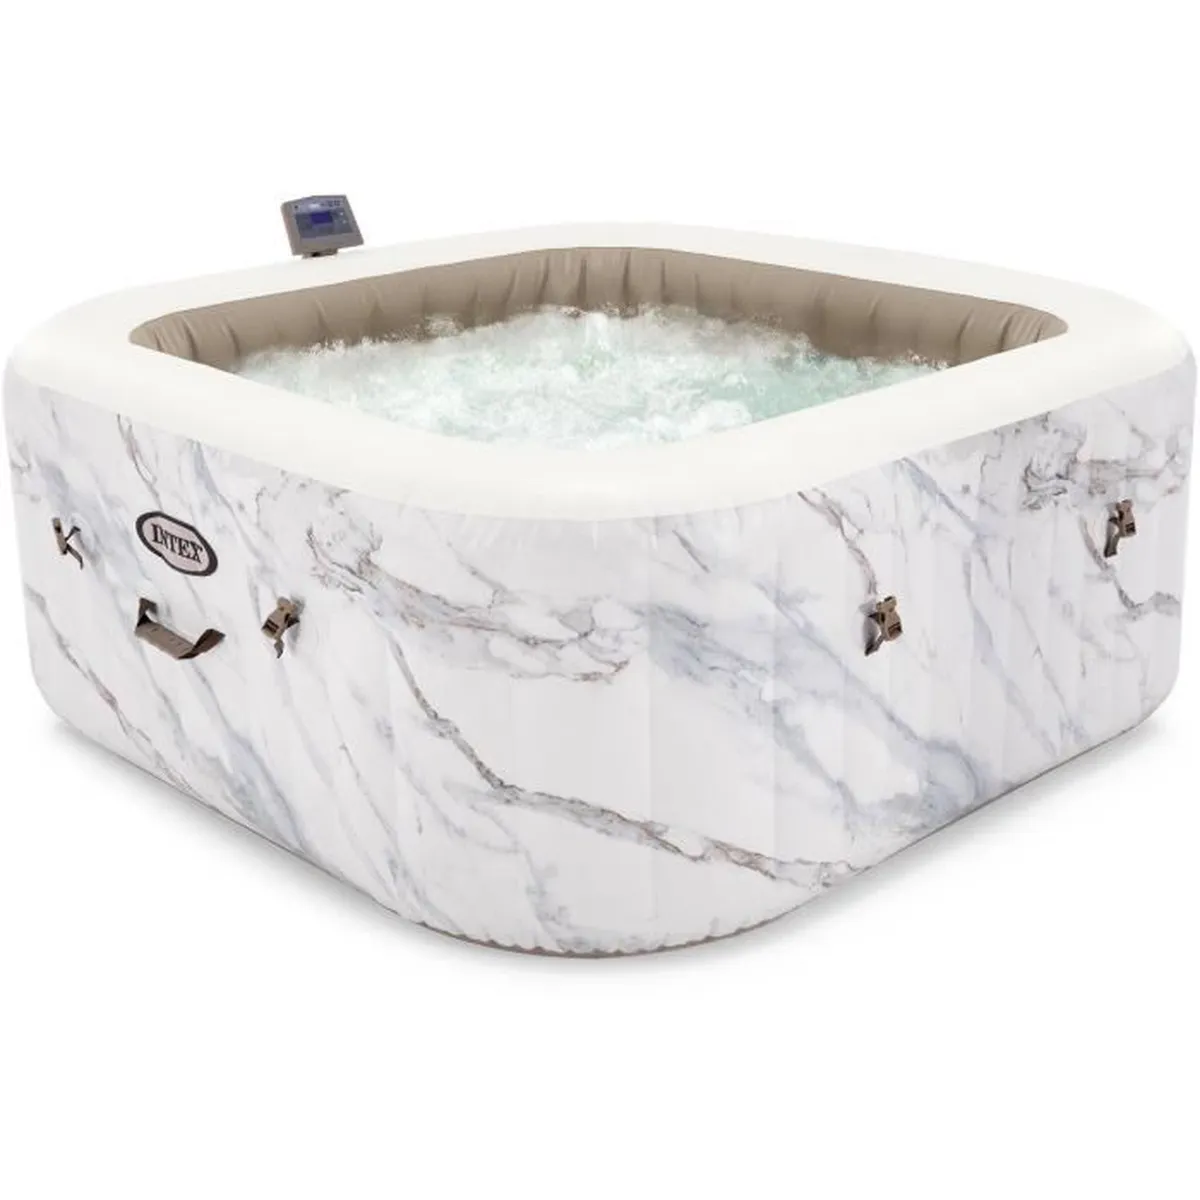 Intex 28464EX Pure spa gonflable Calacatta 4 places pas cher - Spa gonflable Cdiscount